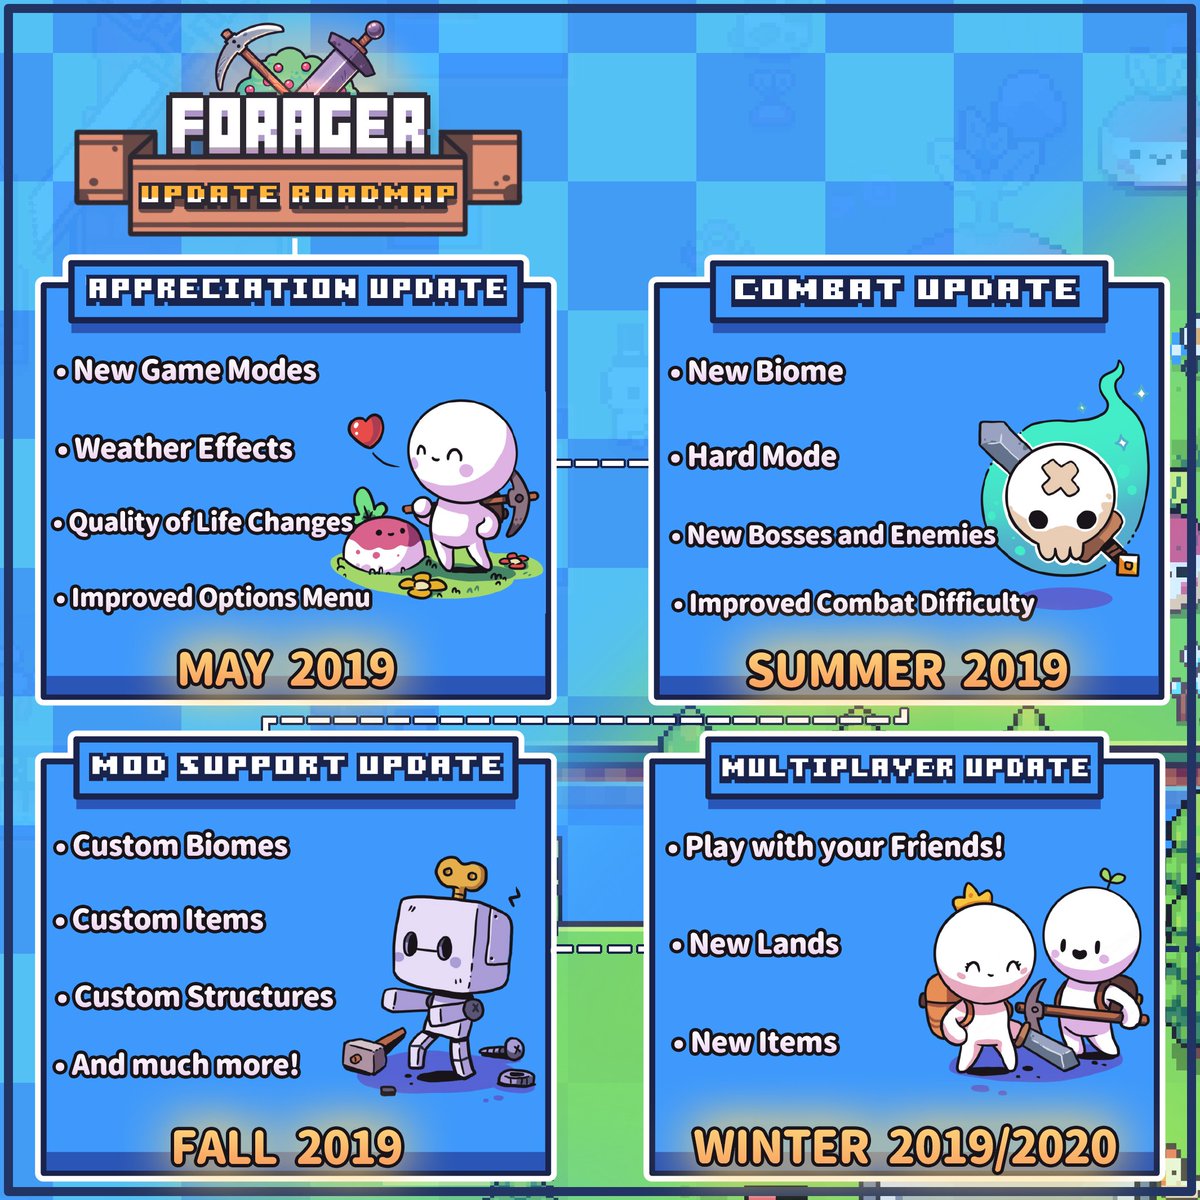 Lære Kreta indelukke Humble Bundle on Twitter: "Ready for more Forager? @_HopFrog has revealed  the content roadmap for the rest of the year! Highlights include: ⛏️ New  game modes ⛏️ Hard mode ⛏️ Mod support